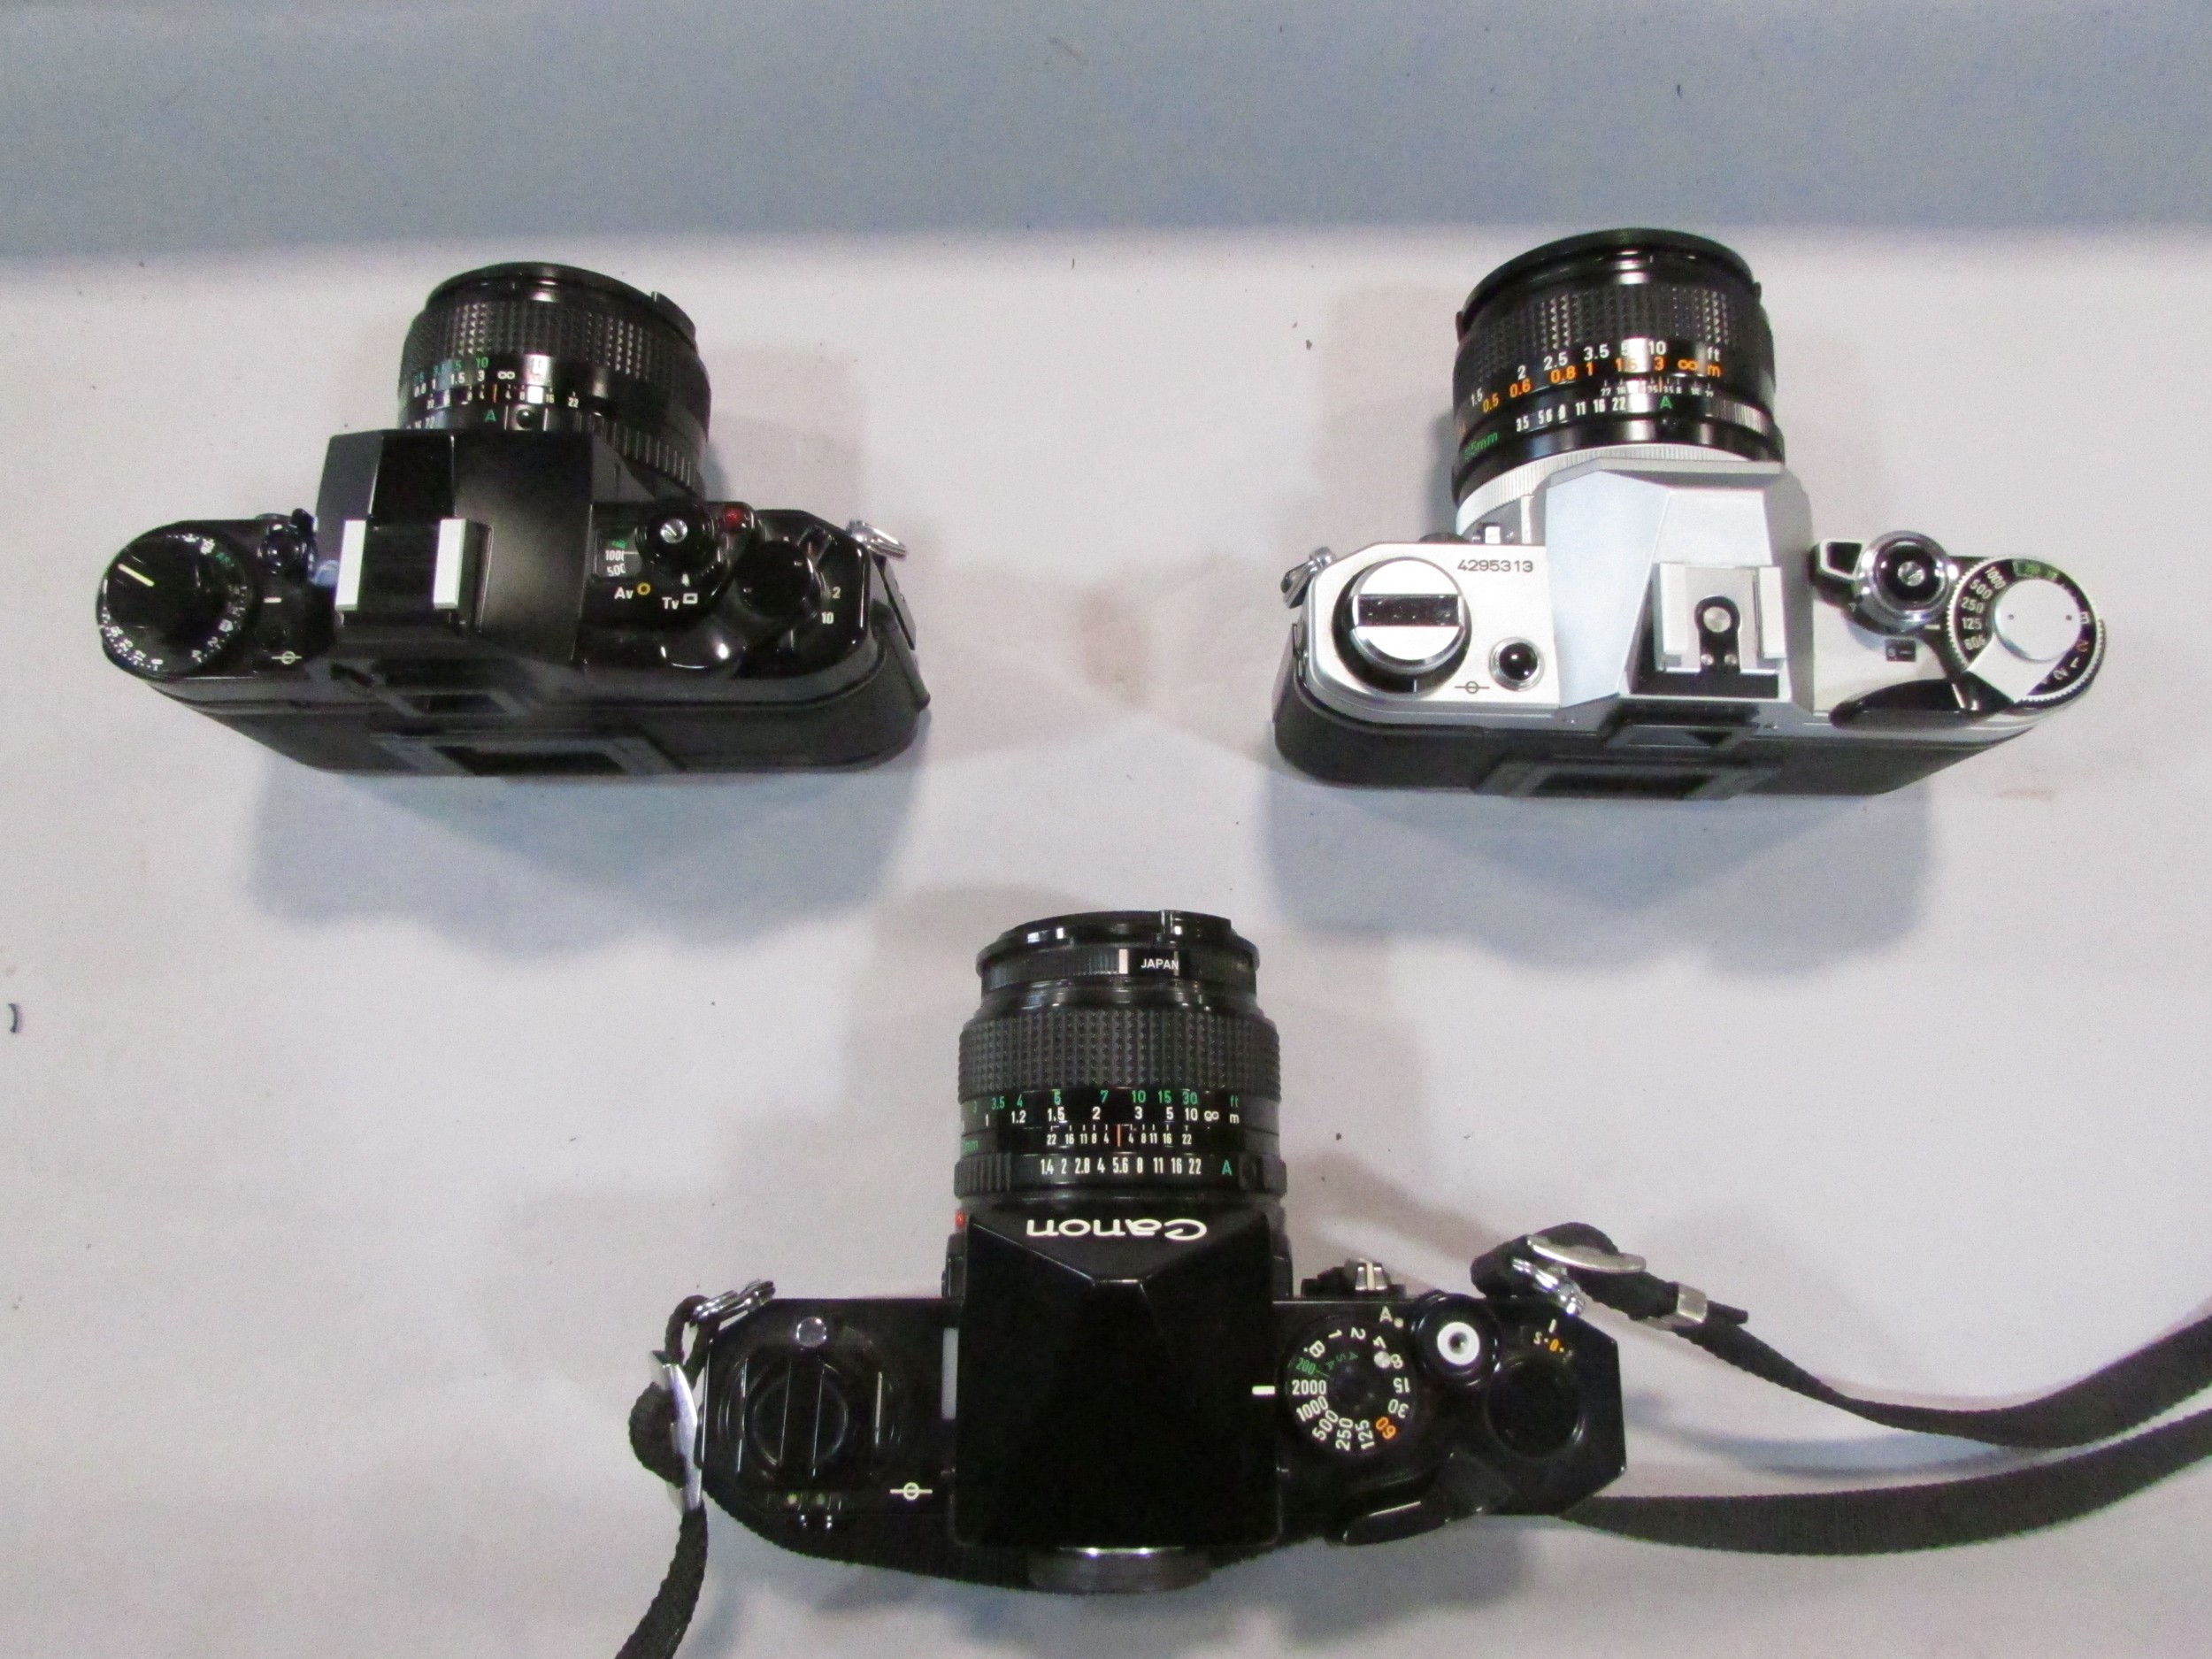 Three Canon cameras: models A1, AE1, F1, together with a 135 millimetre lens, 20 mm lens, all - Image 3 of 5